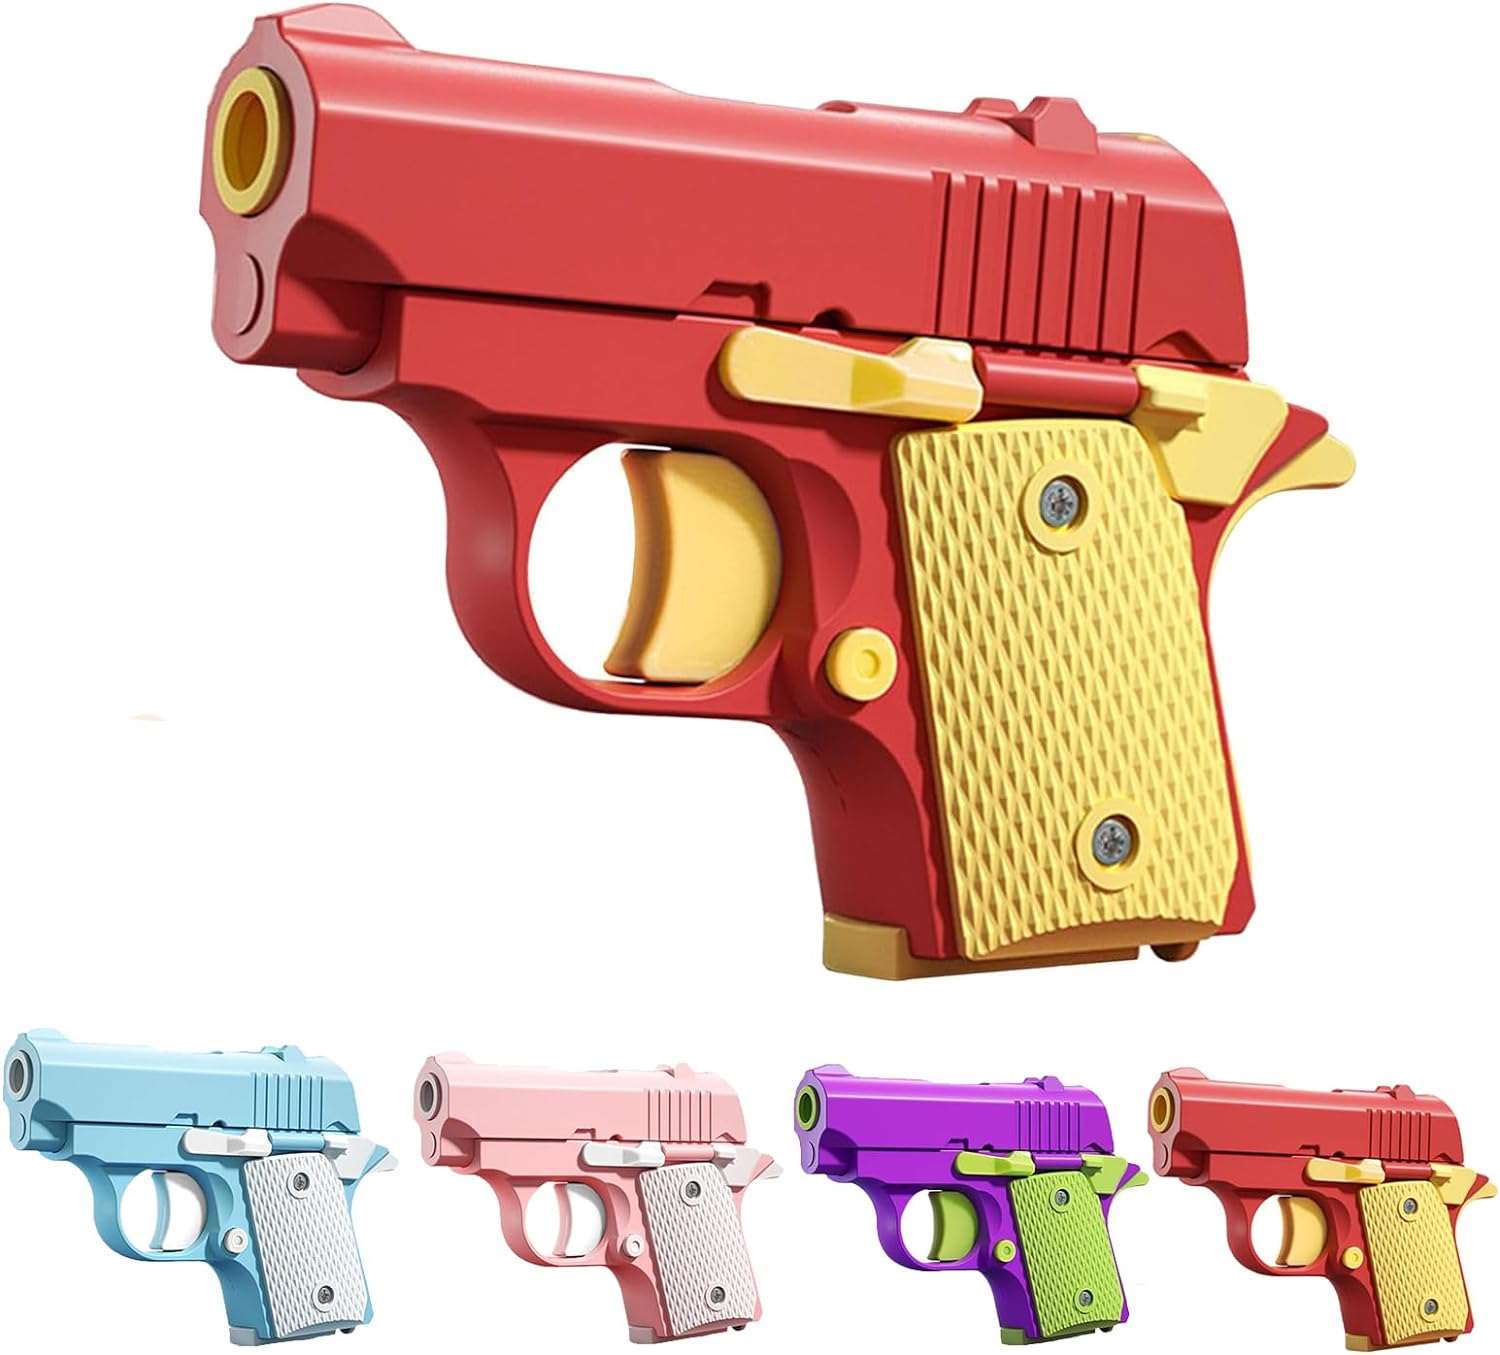 3D Printed Small Pistol Toys, Stress Relief Pistol Toys - Cykapu